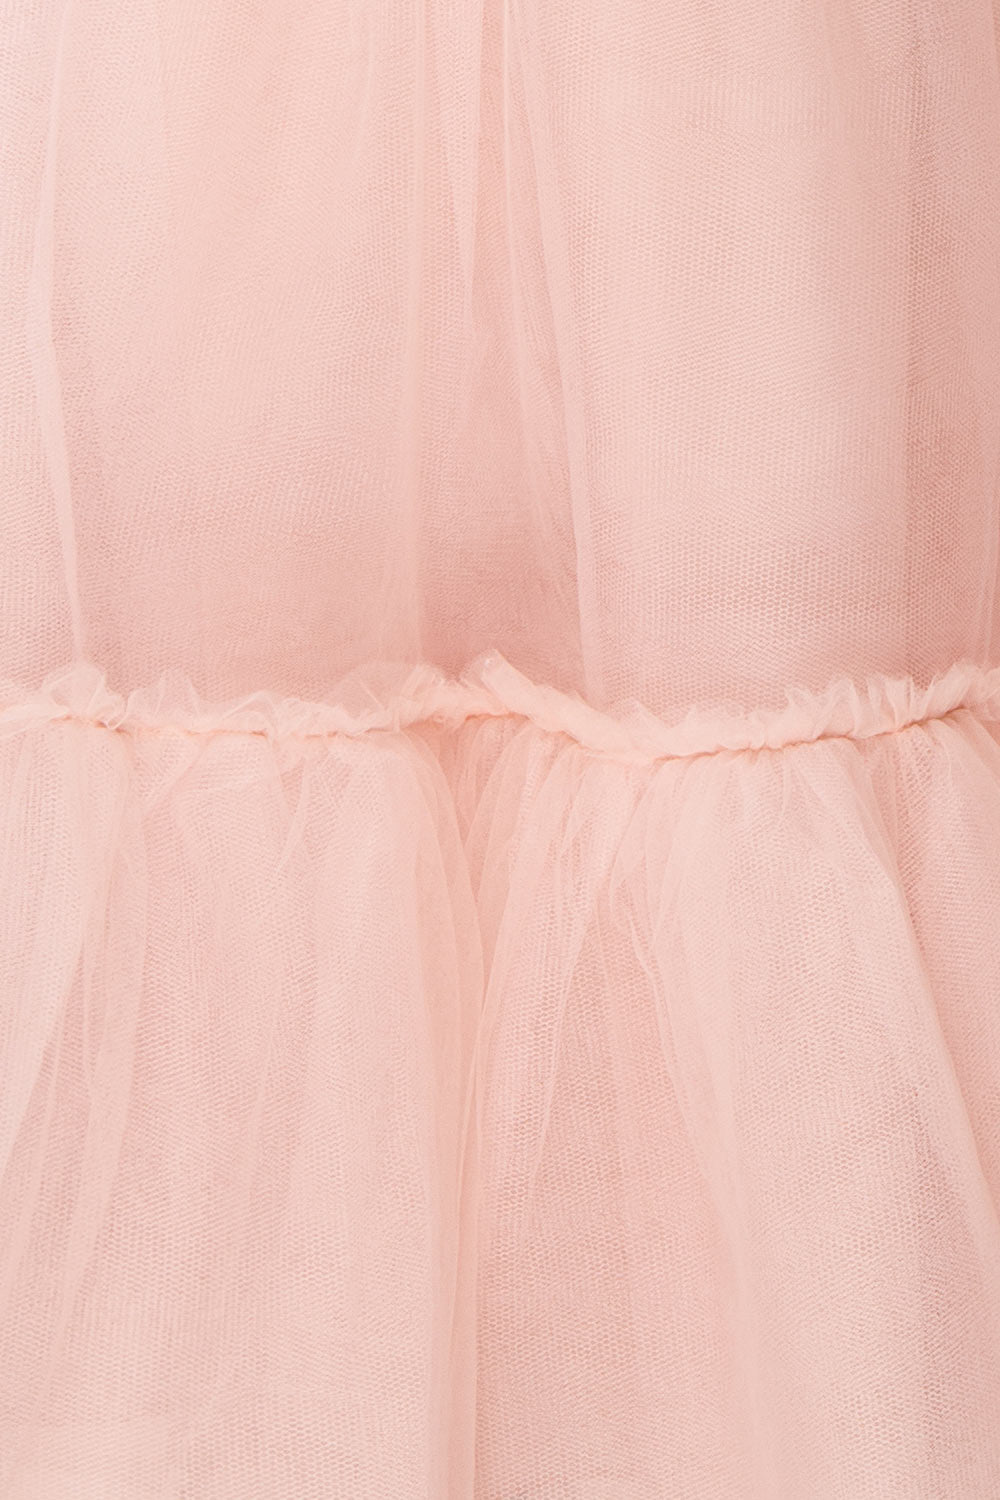 Philana Dusty Pink A-Line Tulle Skirt | Boutique 1861 fabric details 